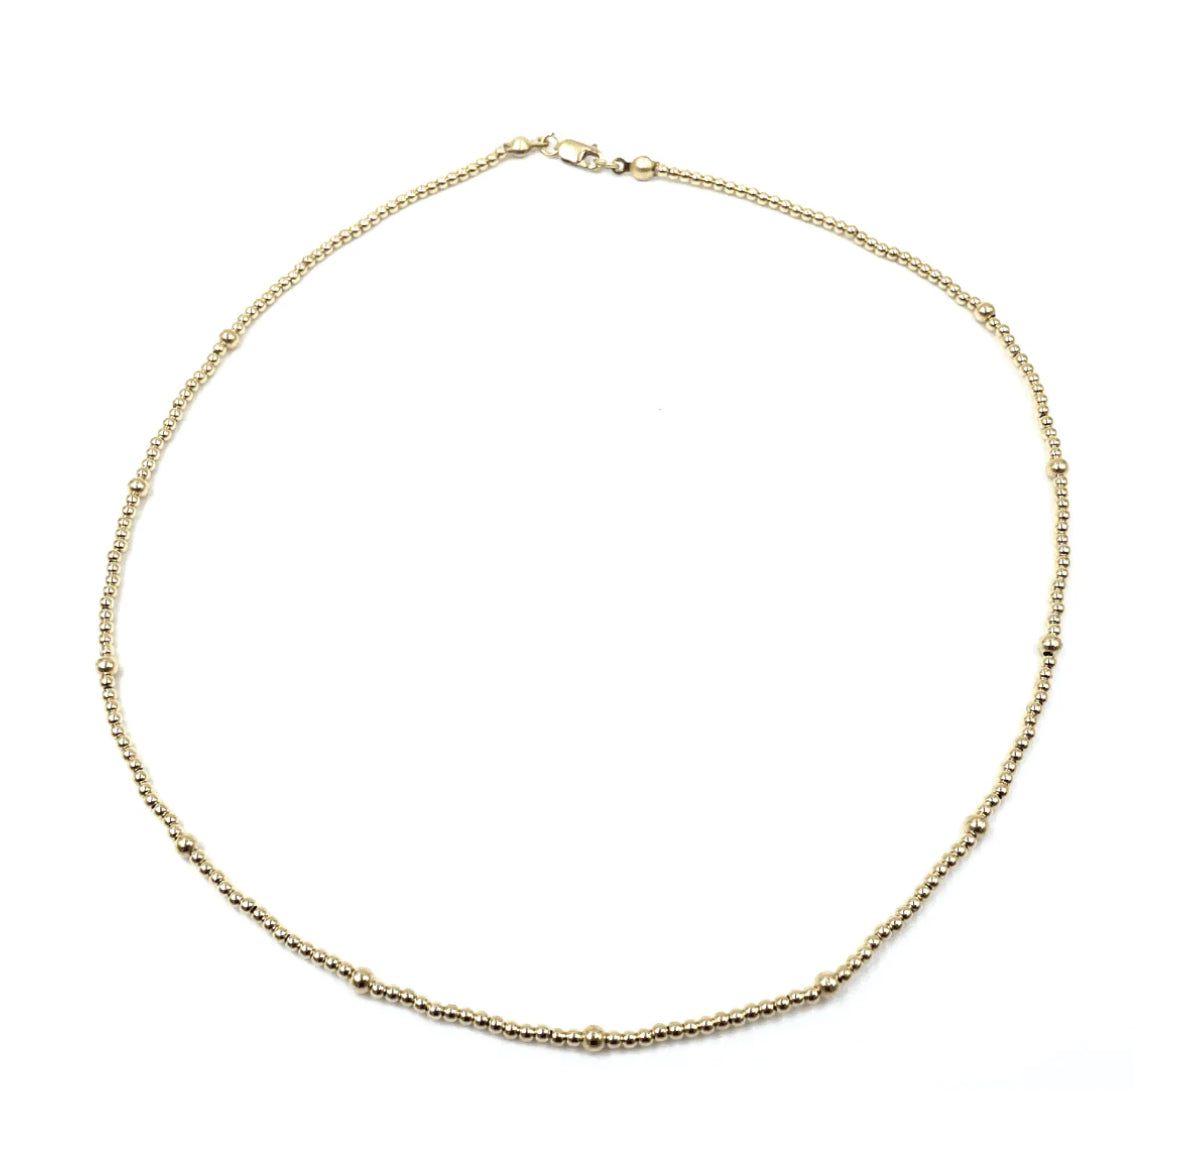 2MM 14K GOLD FILLED WATERPROOF NECKLACE